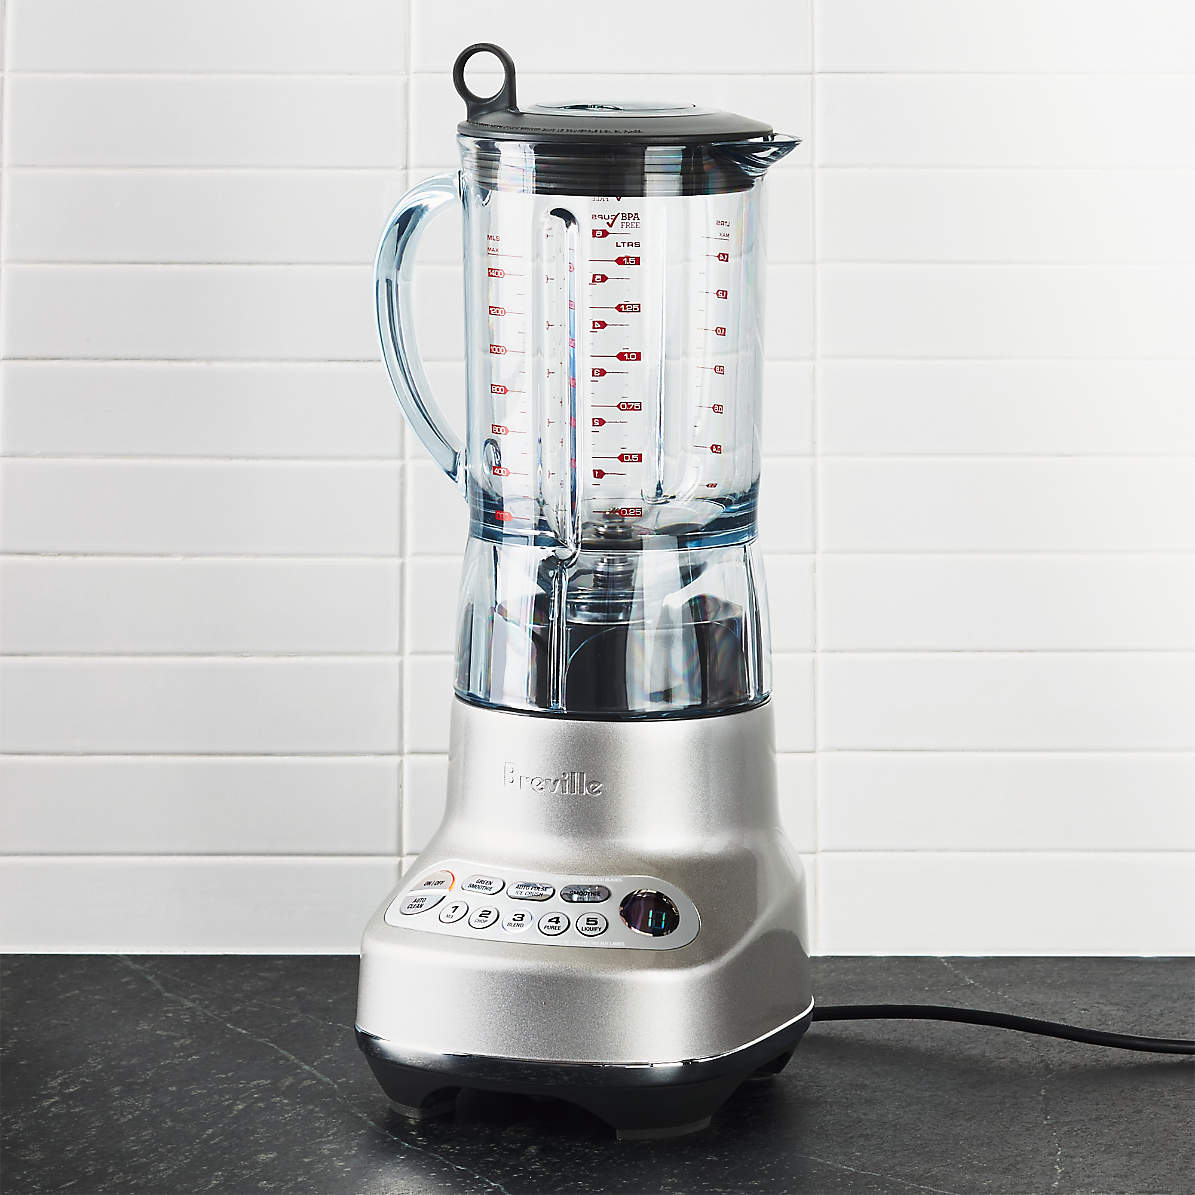 Breville the Fresh & Furious Brushed Stainless Steel Countertop Blender + Reviews | Crate Barrel